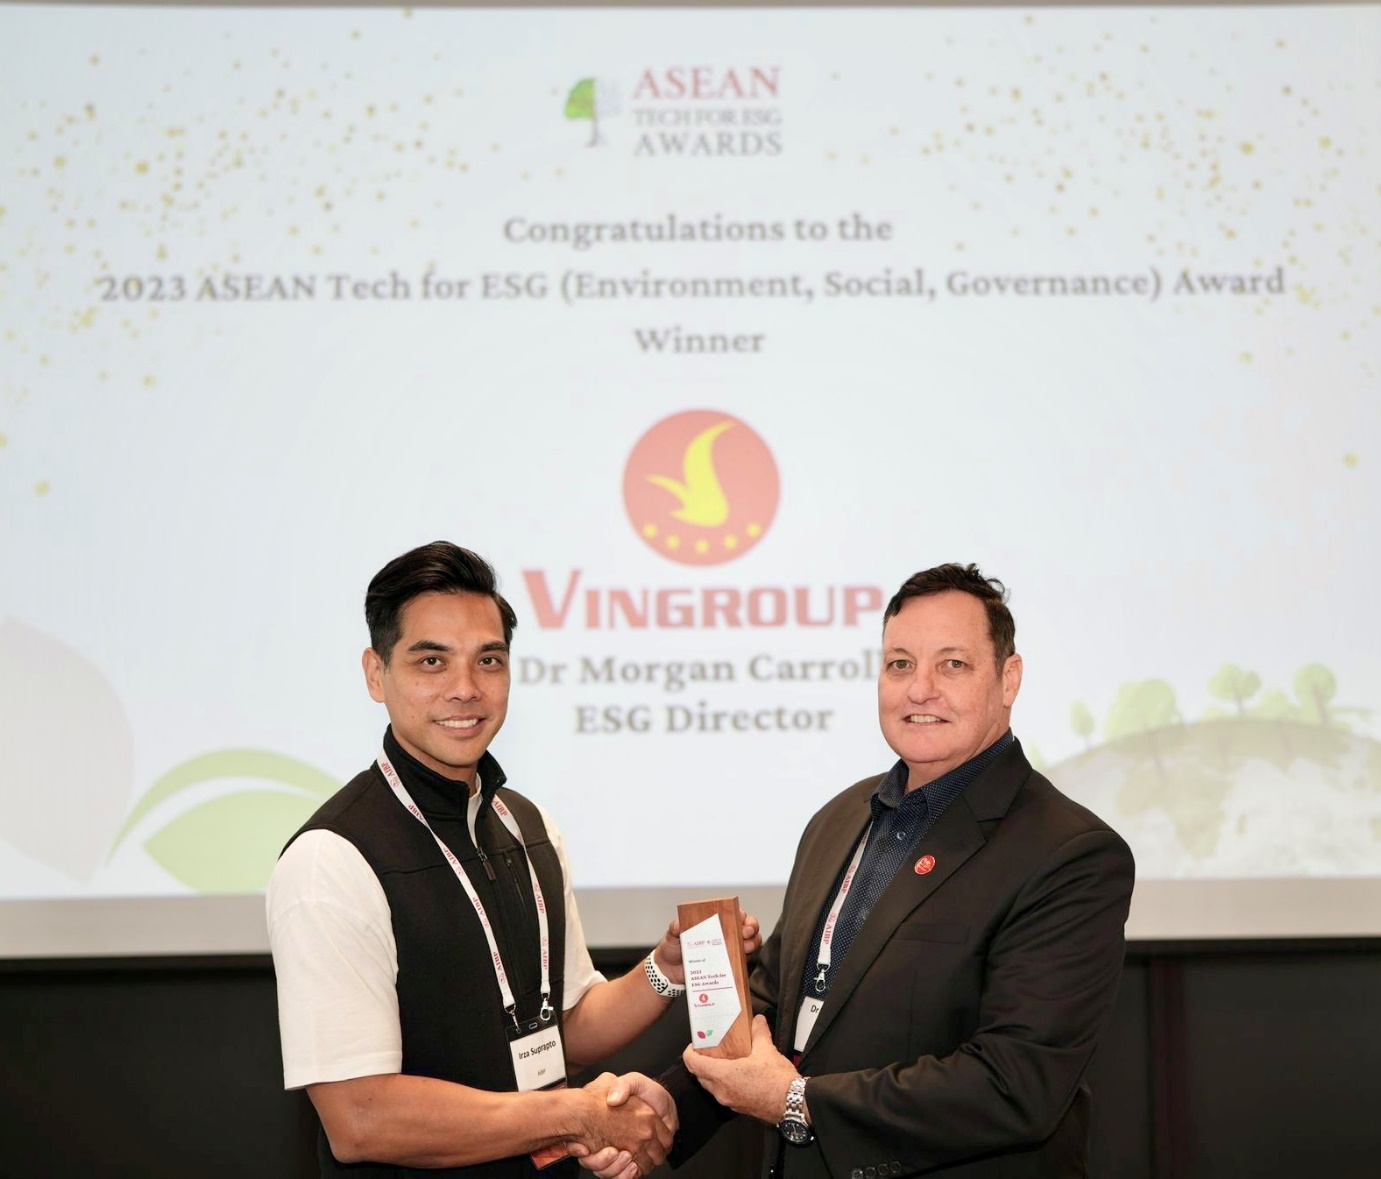 Dr. Morgan Carroll (right) representing Vingroup receives the ASEAN Tech for ESG Award 2023 at the award ceremony in Singapore.